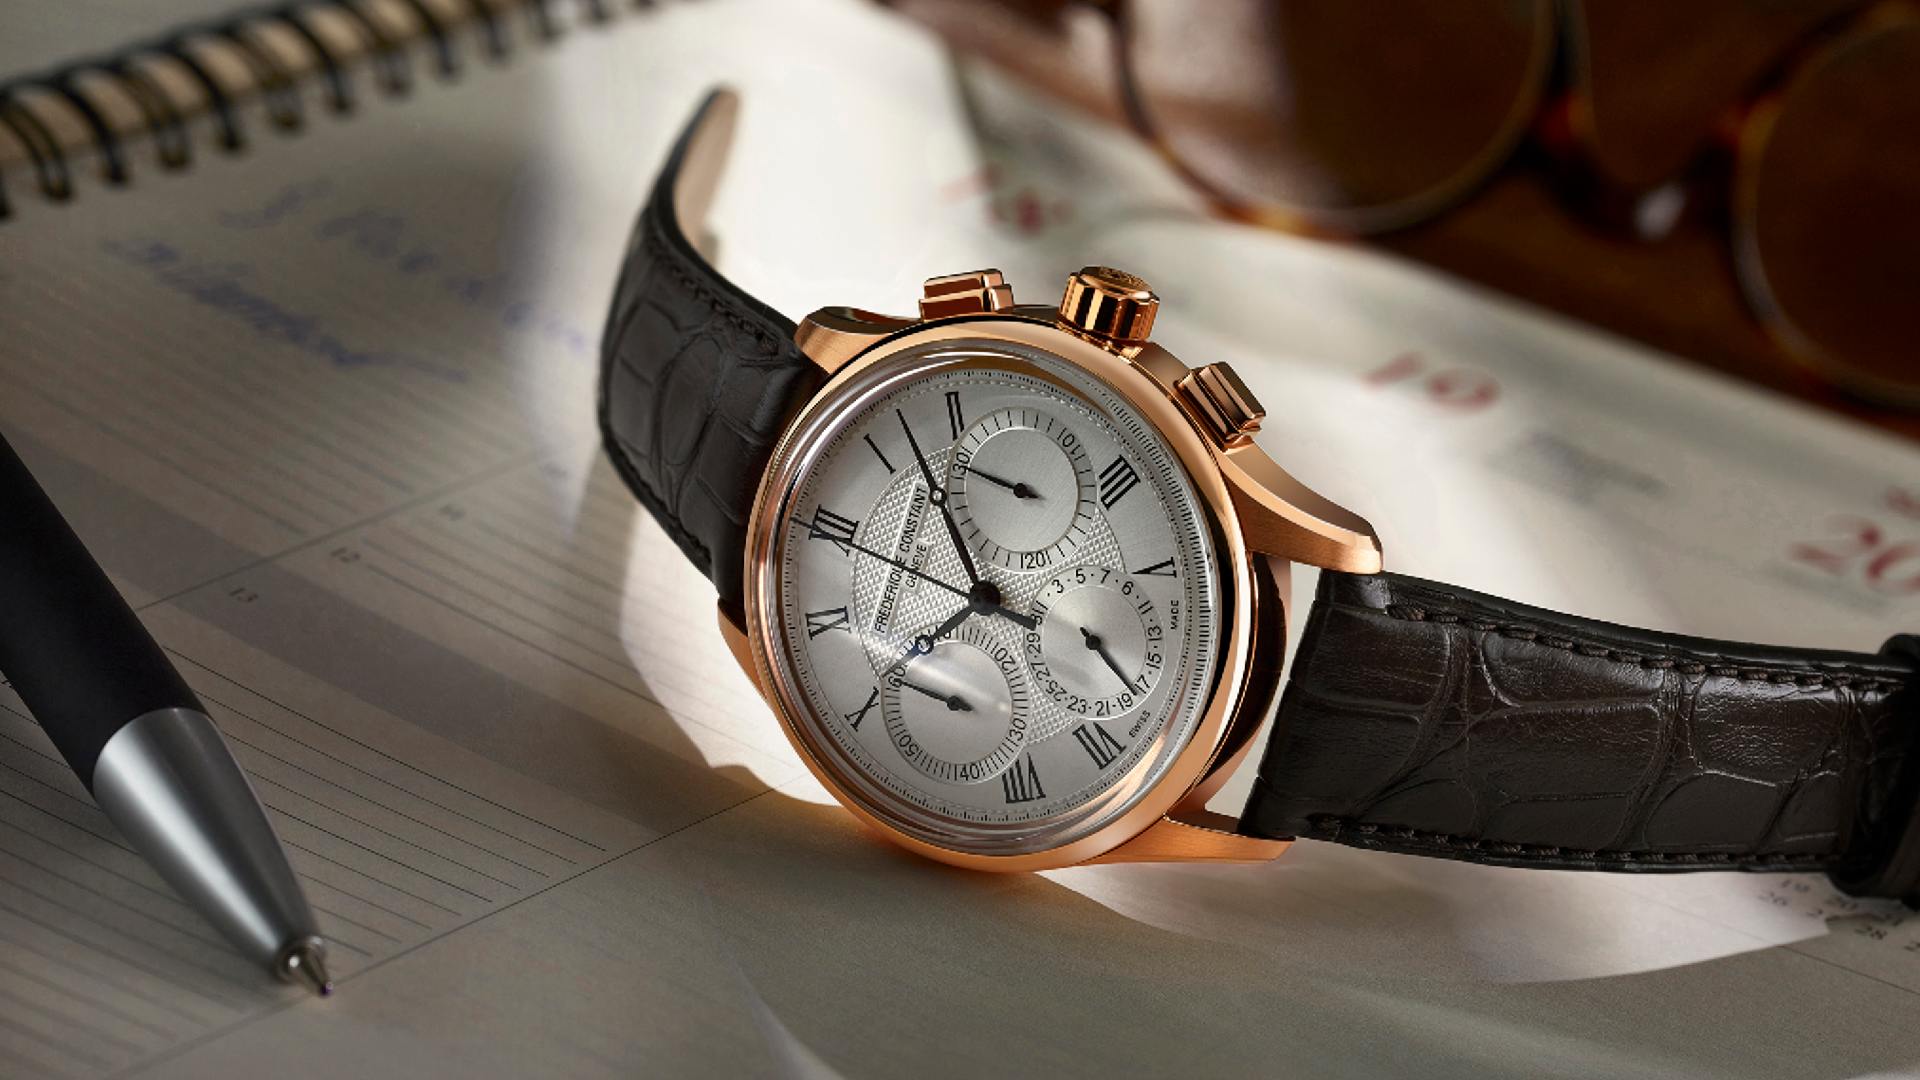 Flyback Chronograph Manufacture watch for man.Automatic movement, brown dial, rose-gold plated case, date, seconds and minutes counters, chronograph and brown leather strap